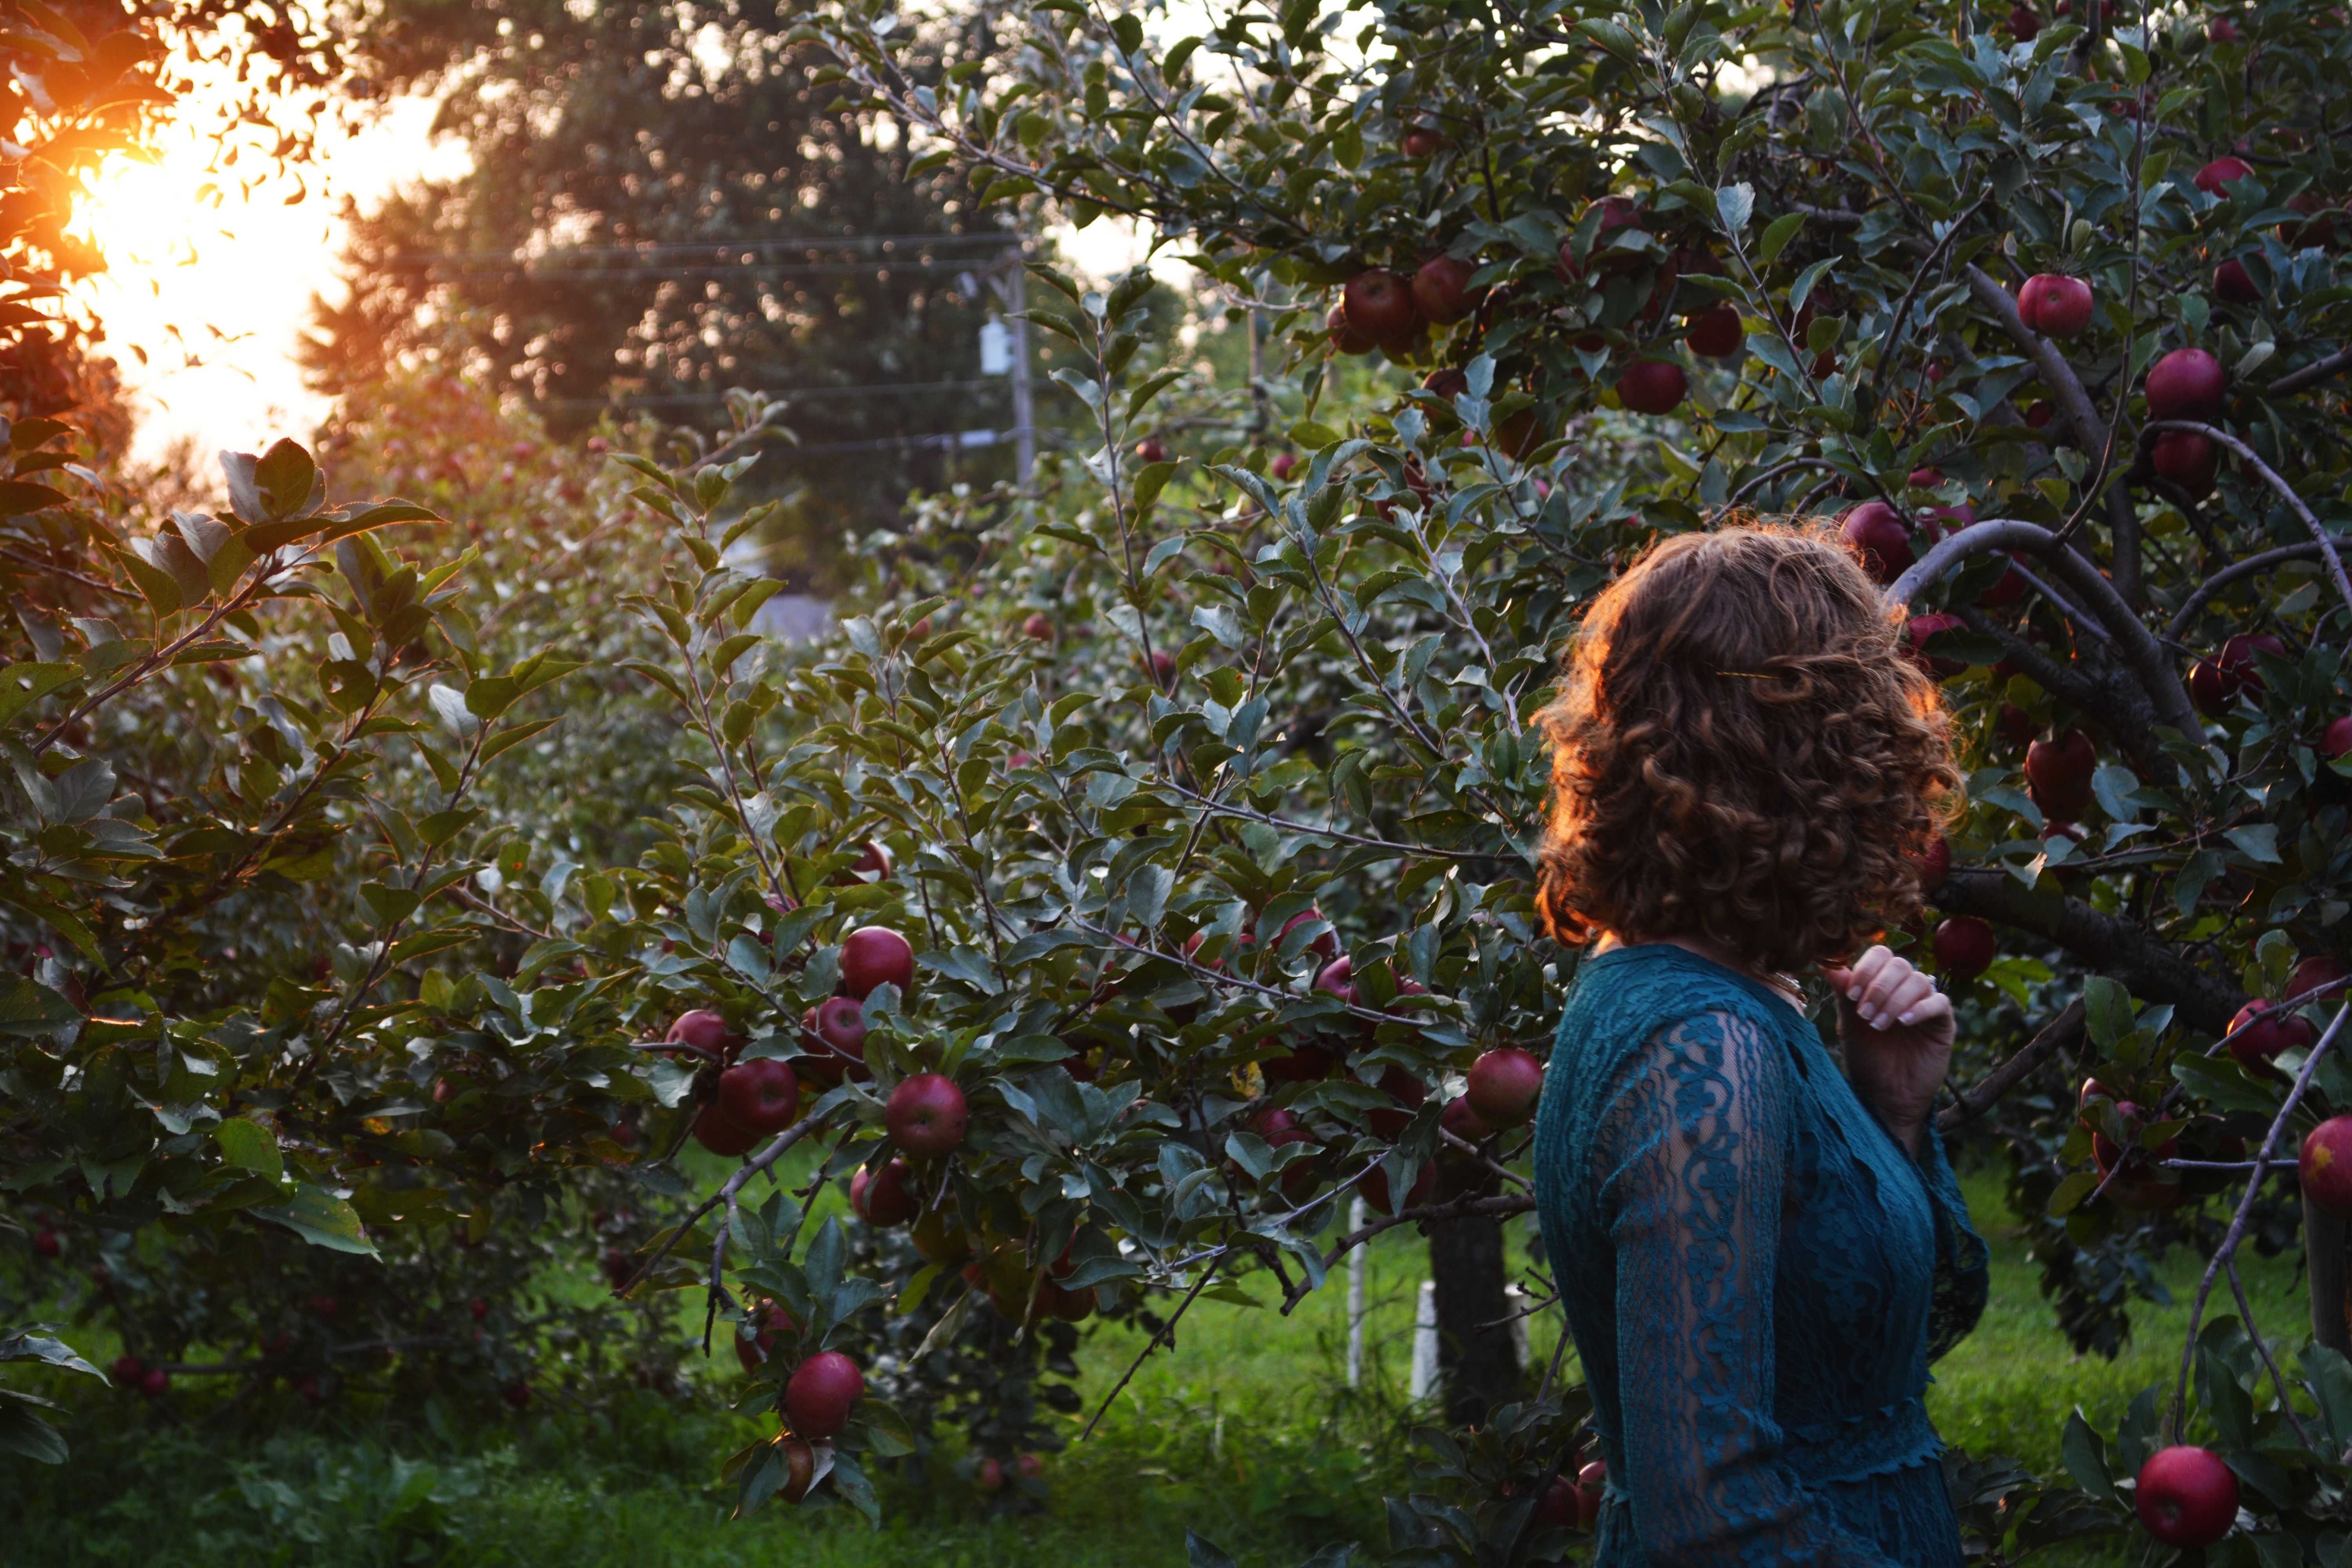 Apple-picking season is here! Head out to these great organic and sustainable apple orchards